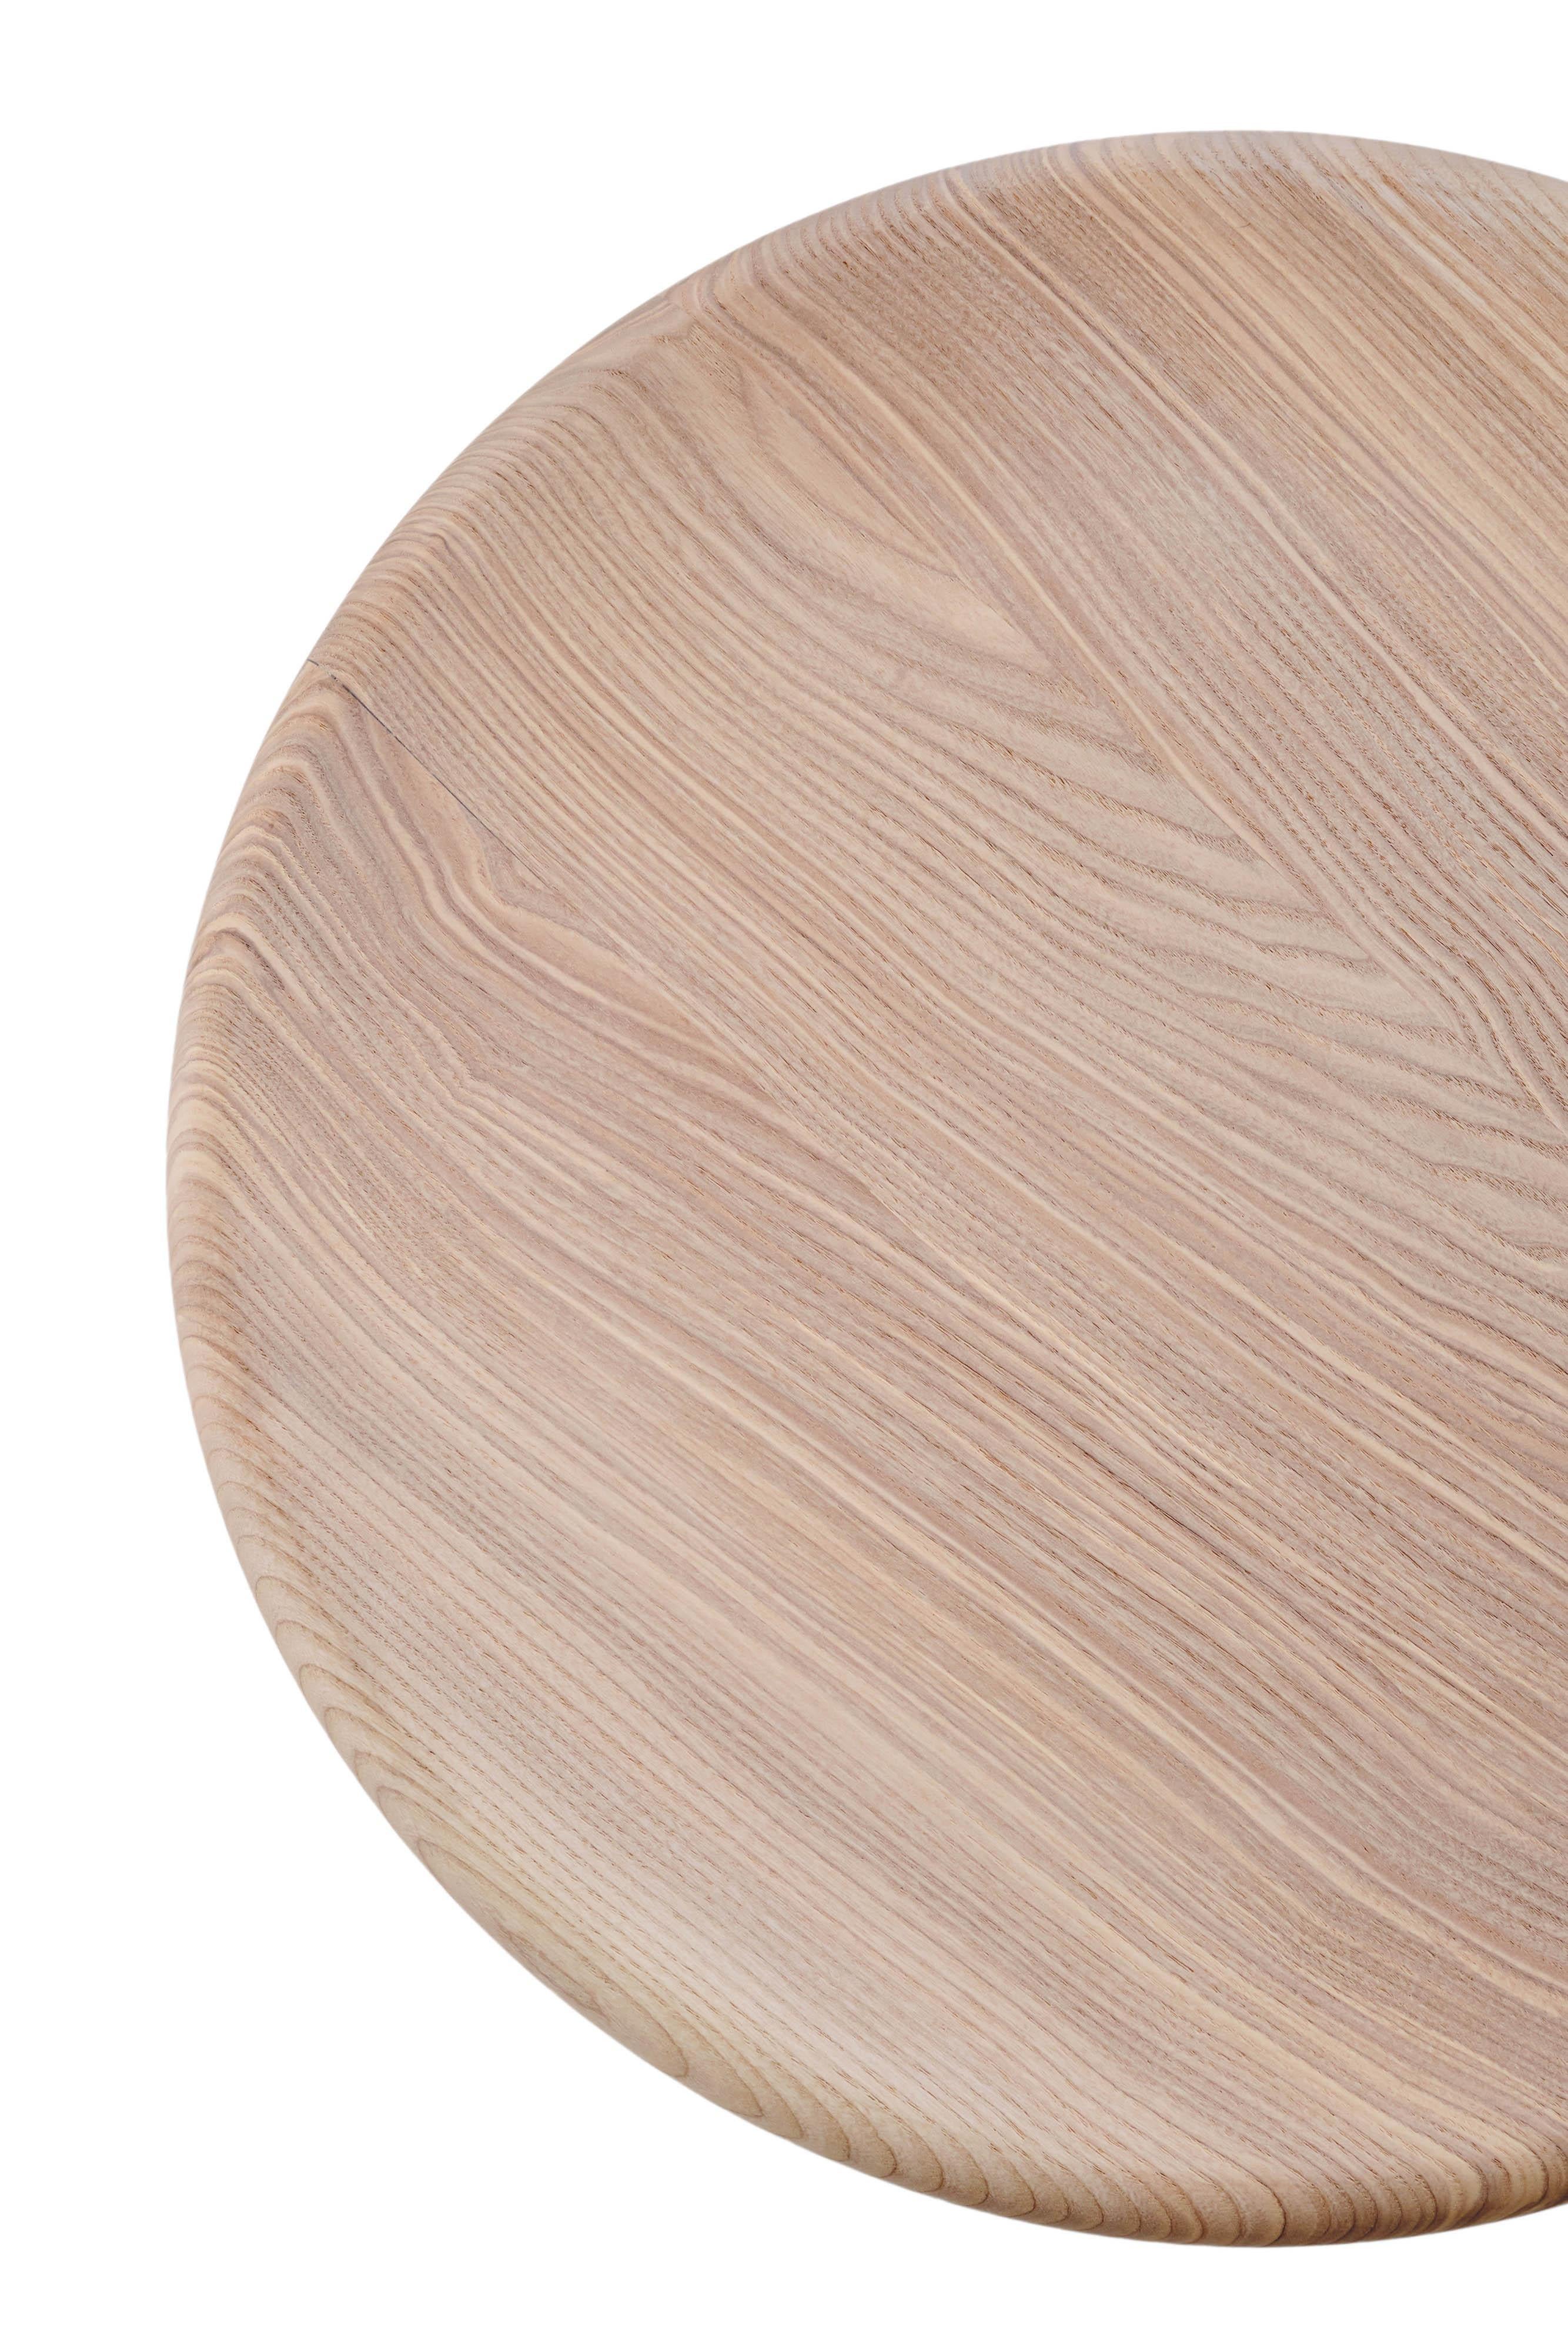 Table basse ou d'appoint contemporaine 'Freyja 3' by NoOM, Thermo Ash en vente 9